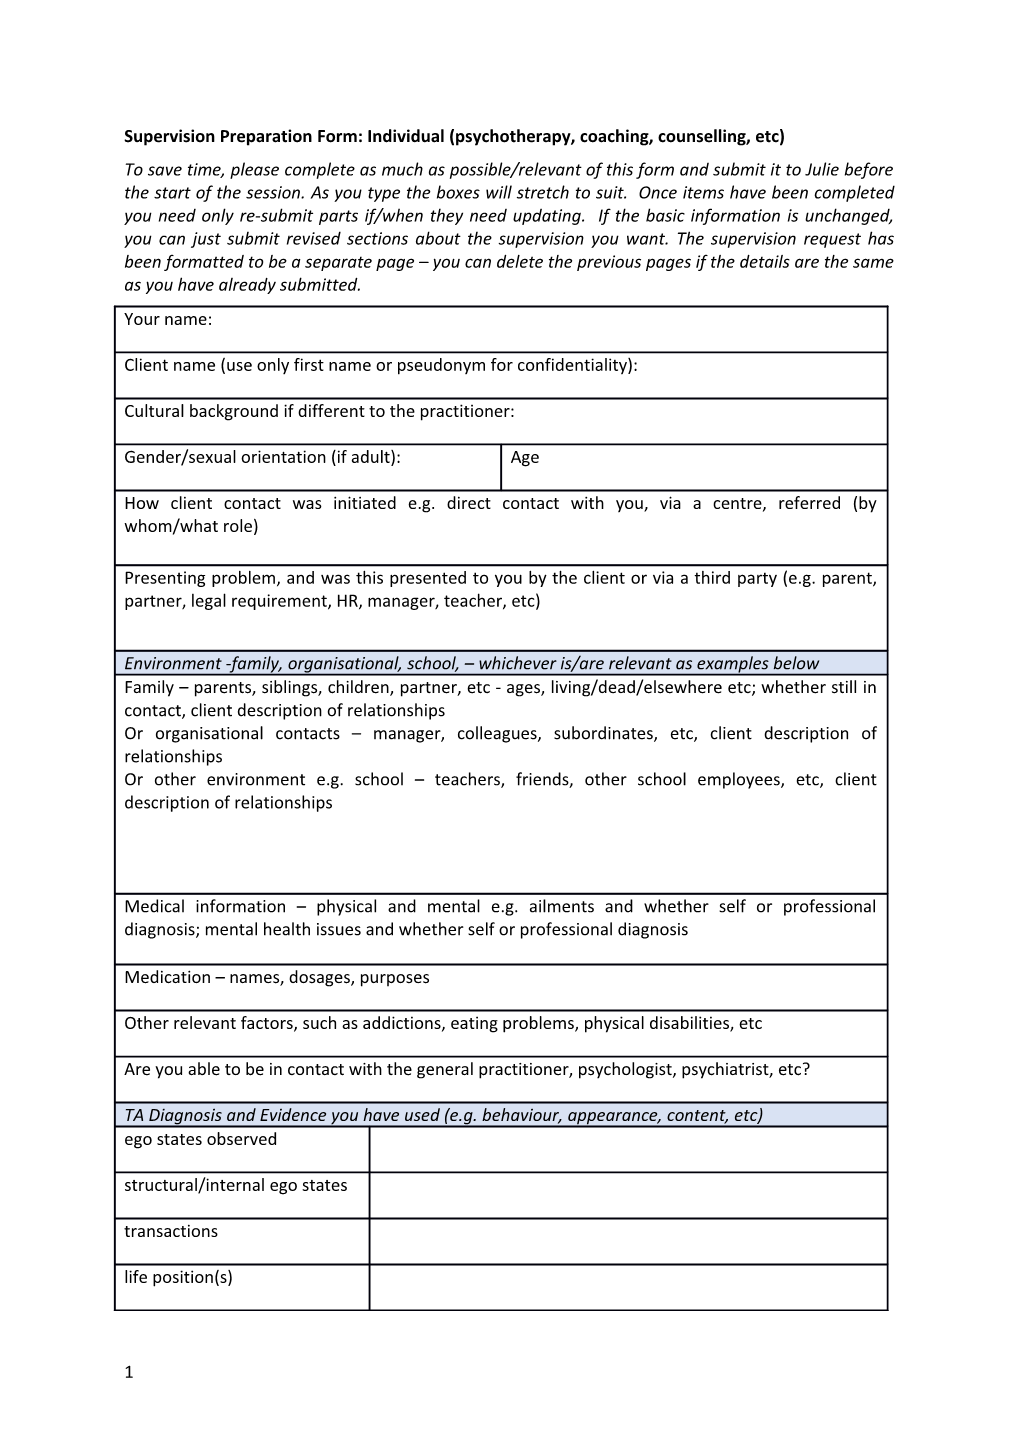 Supervision Preparation Form: Individual (Psychotherapy, Coaching, Counselling, Etc)